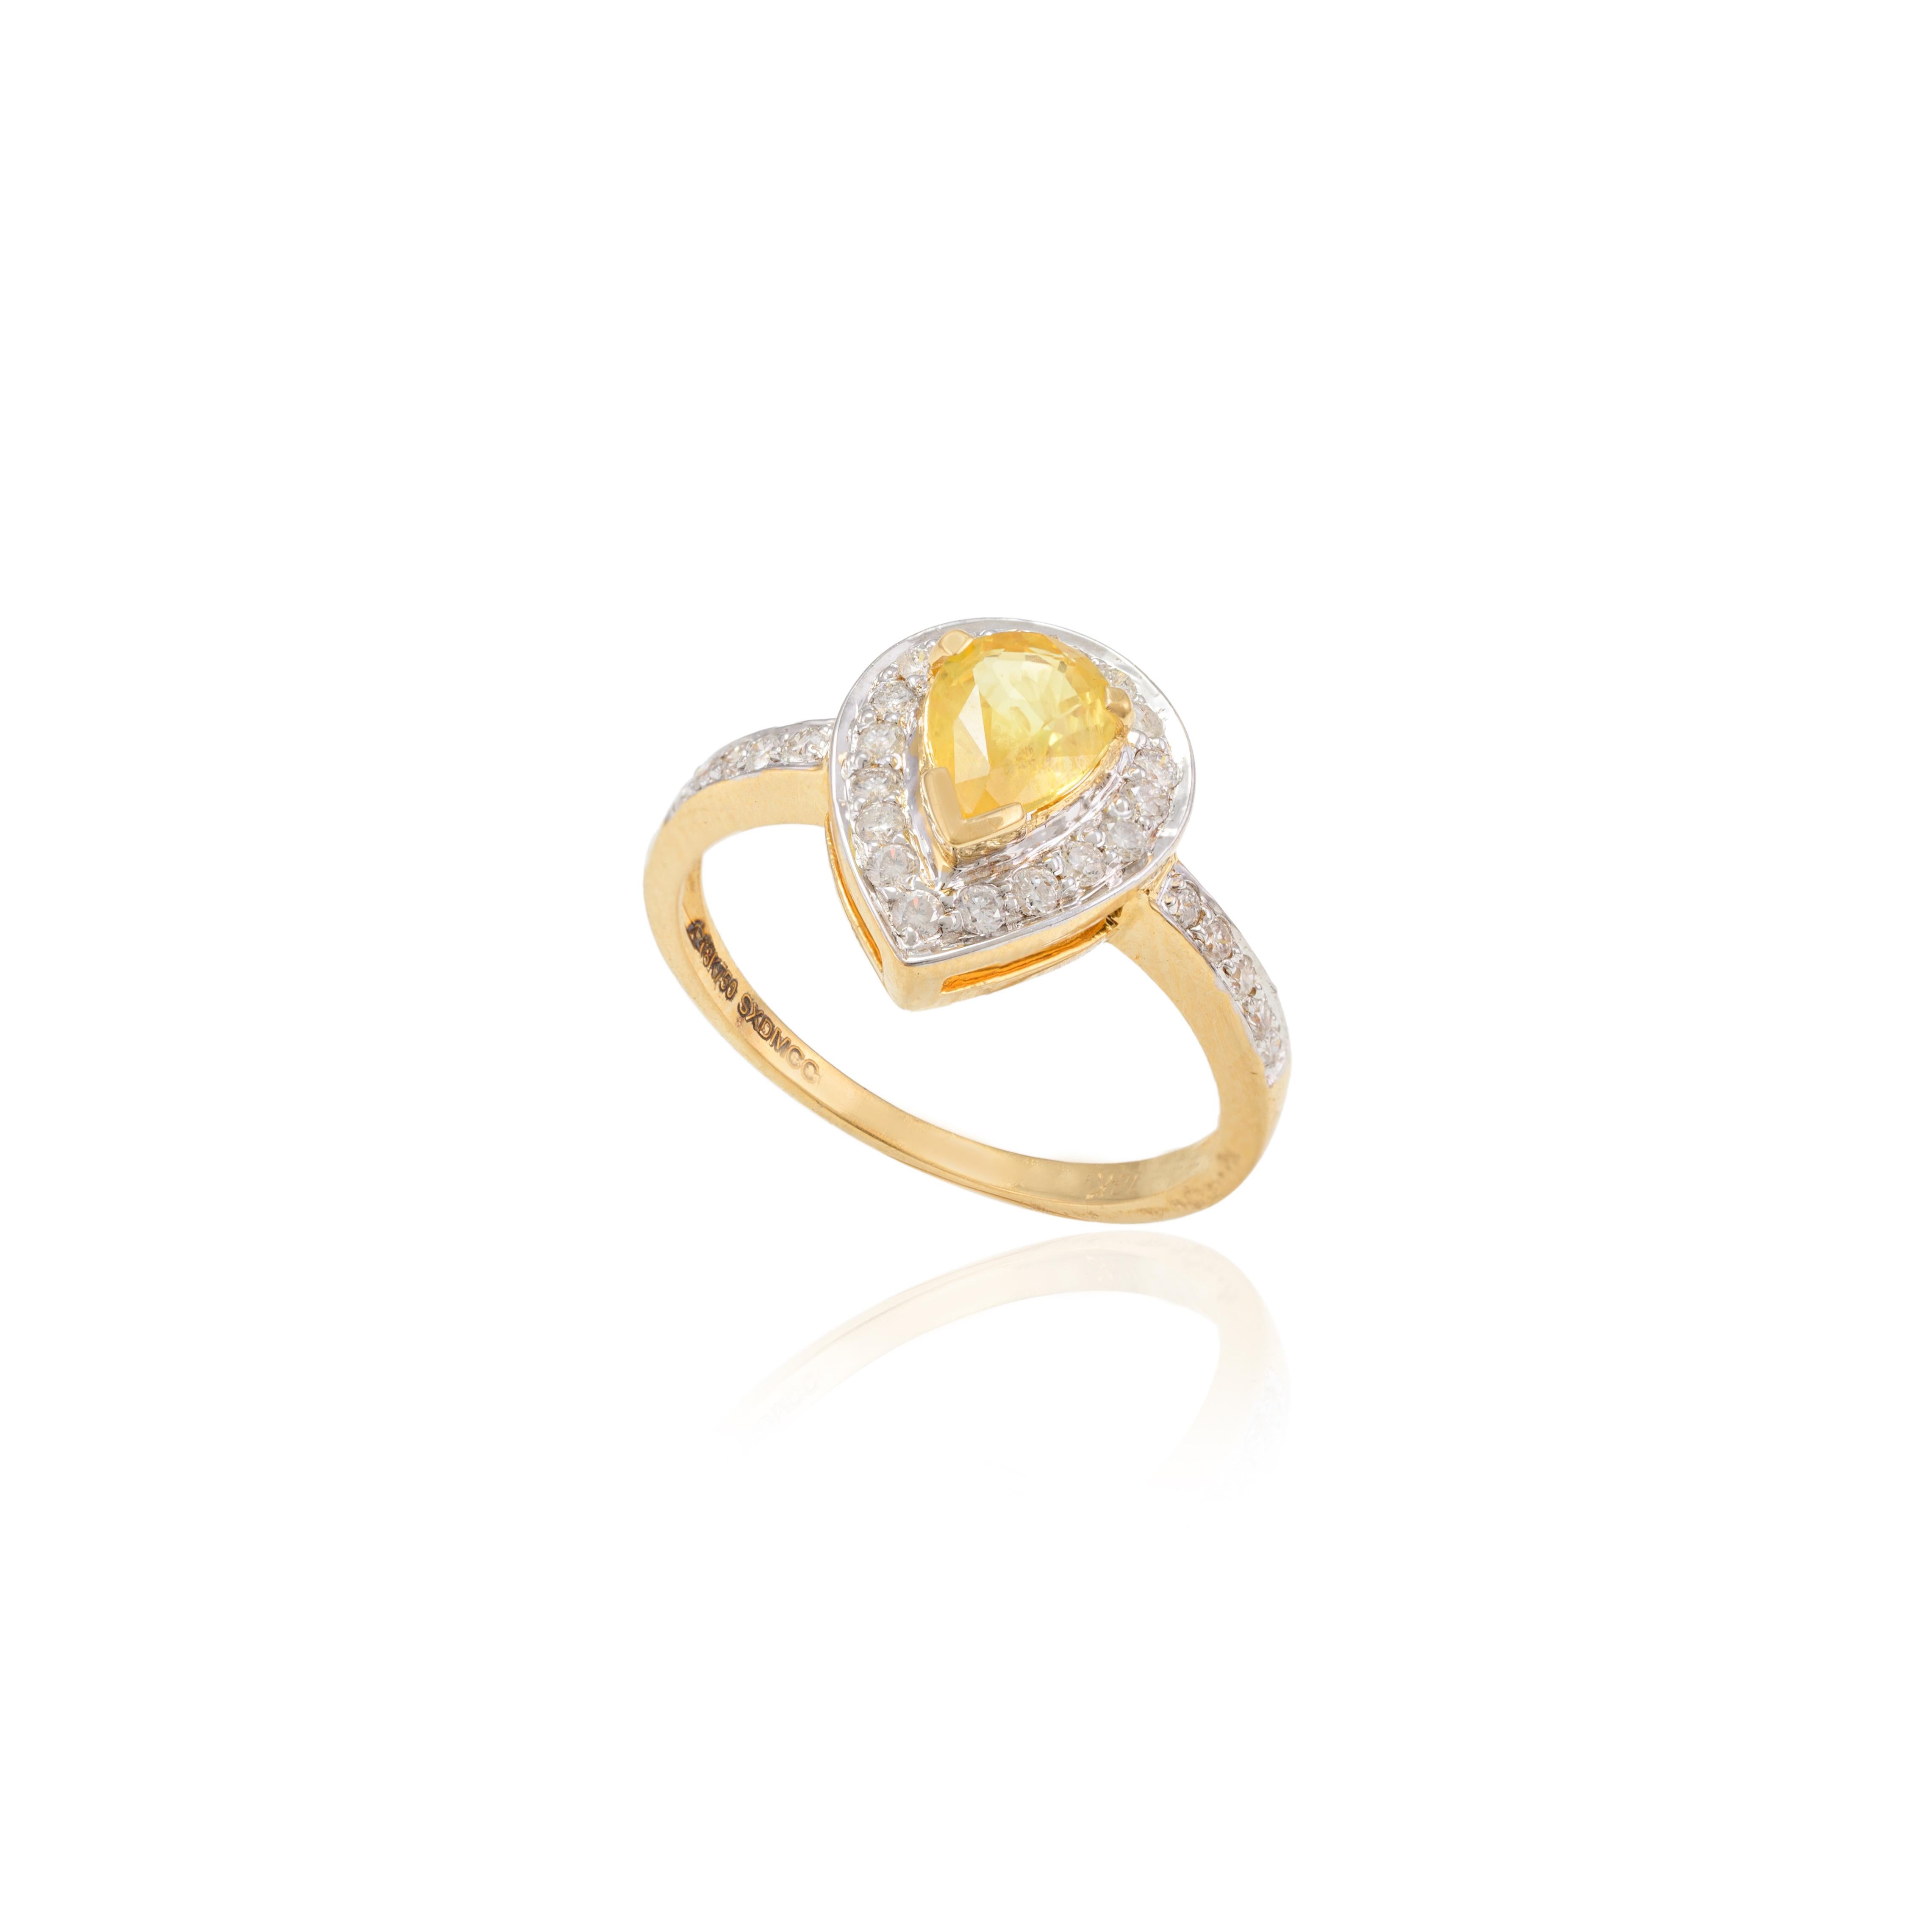 For Sale:  0.89 Ct Pear Cut Yellow Sapphire Diamond 18k Solid Yellow Gold Engagement Ring 3